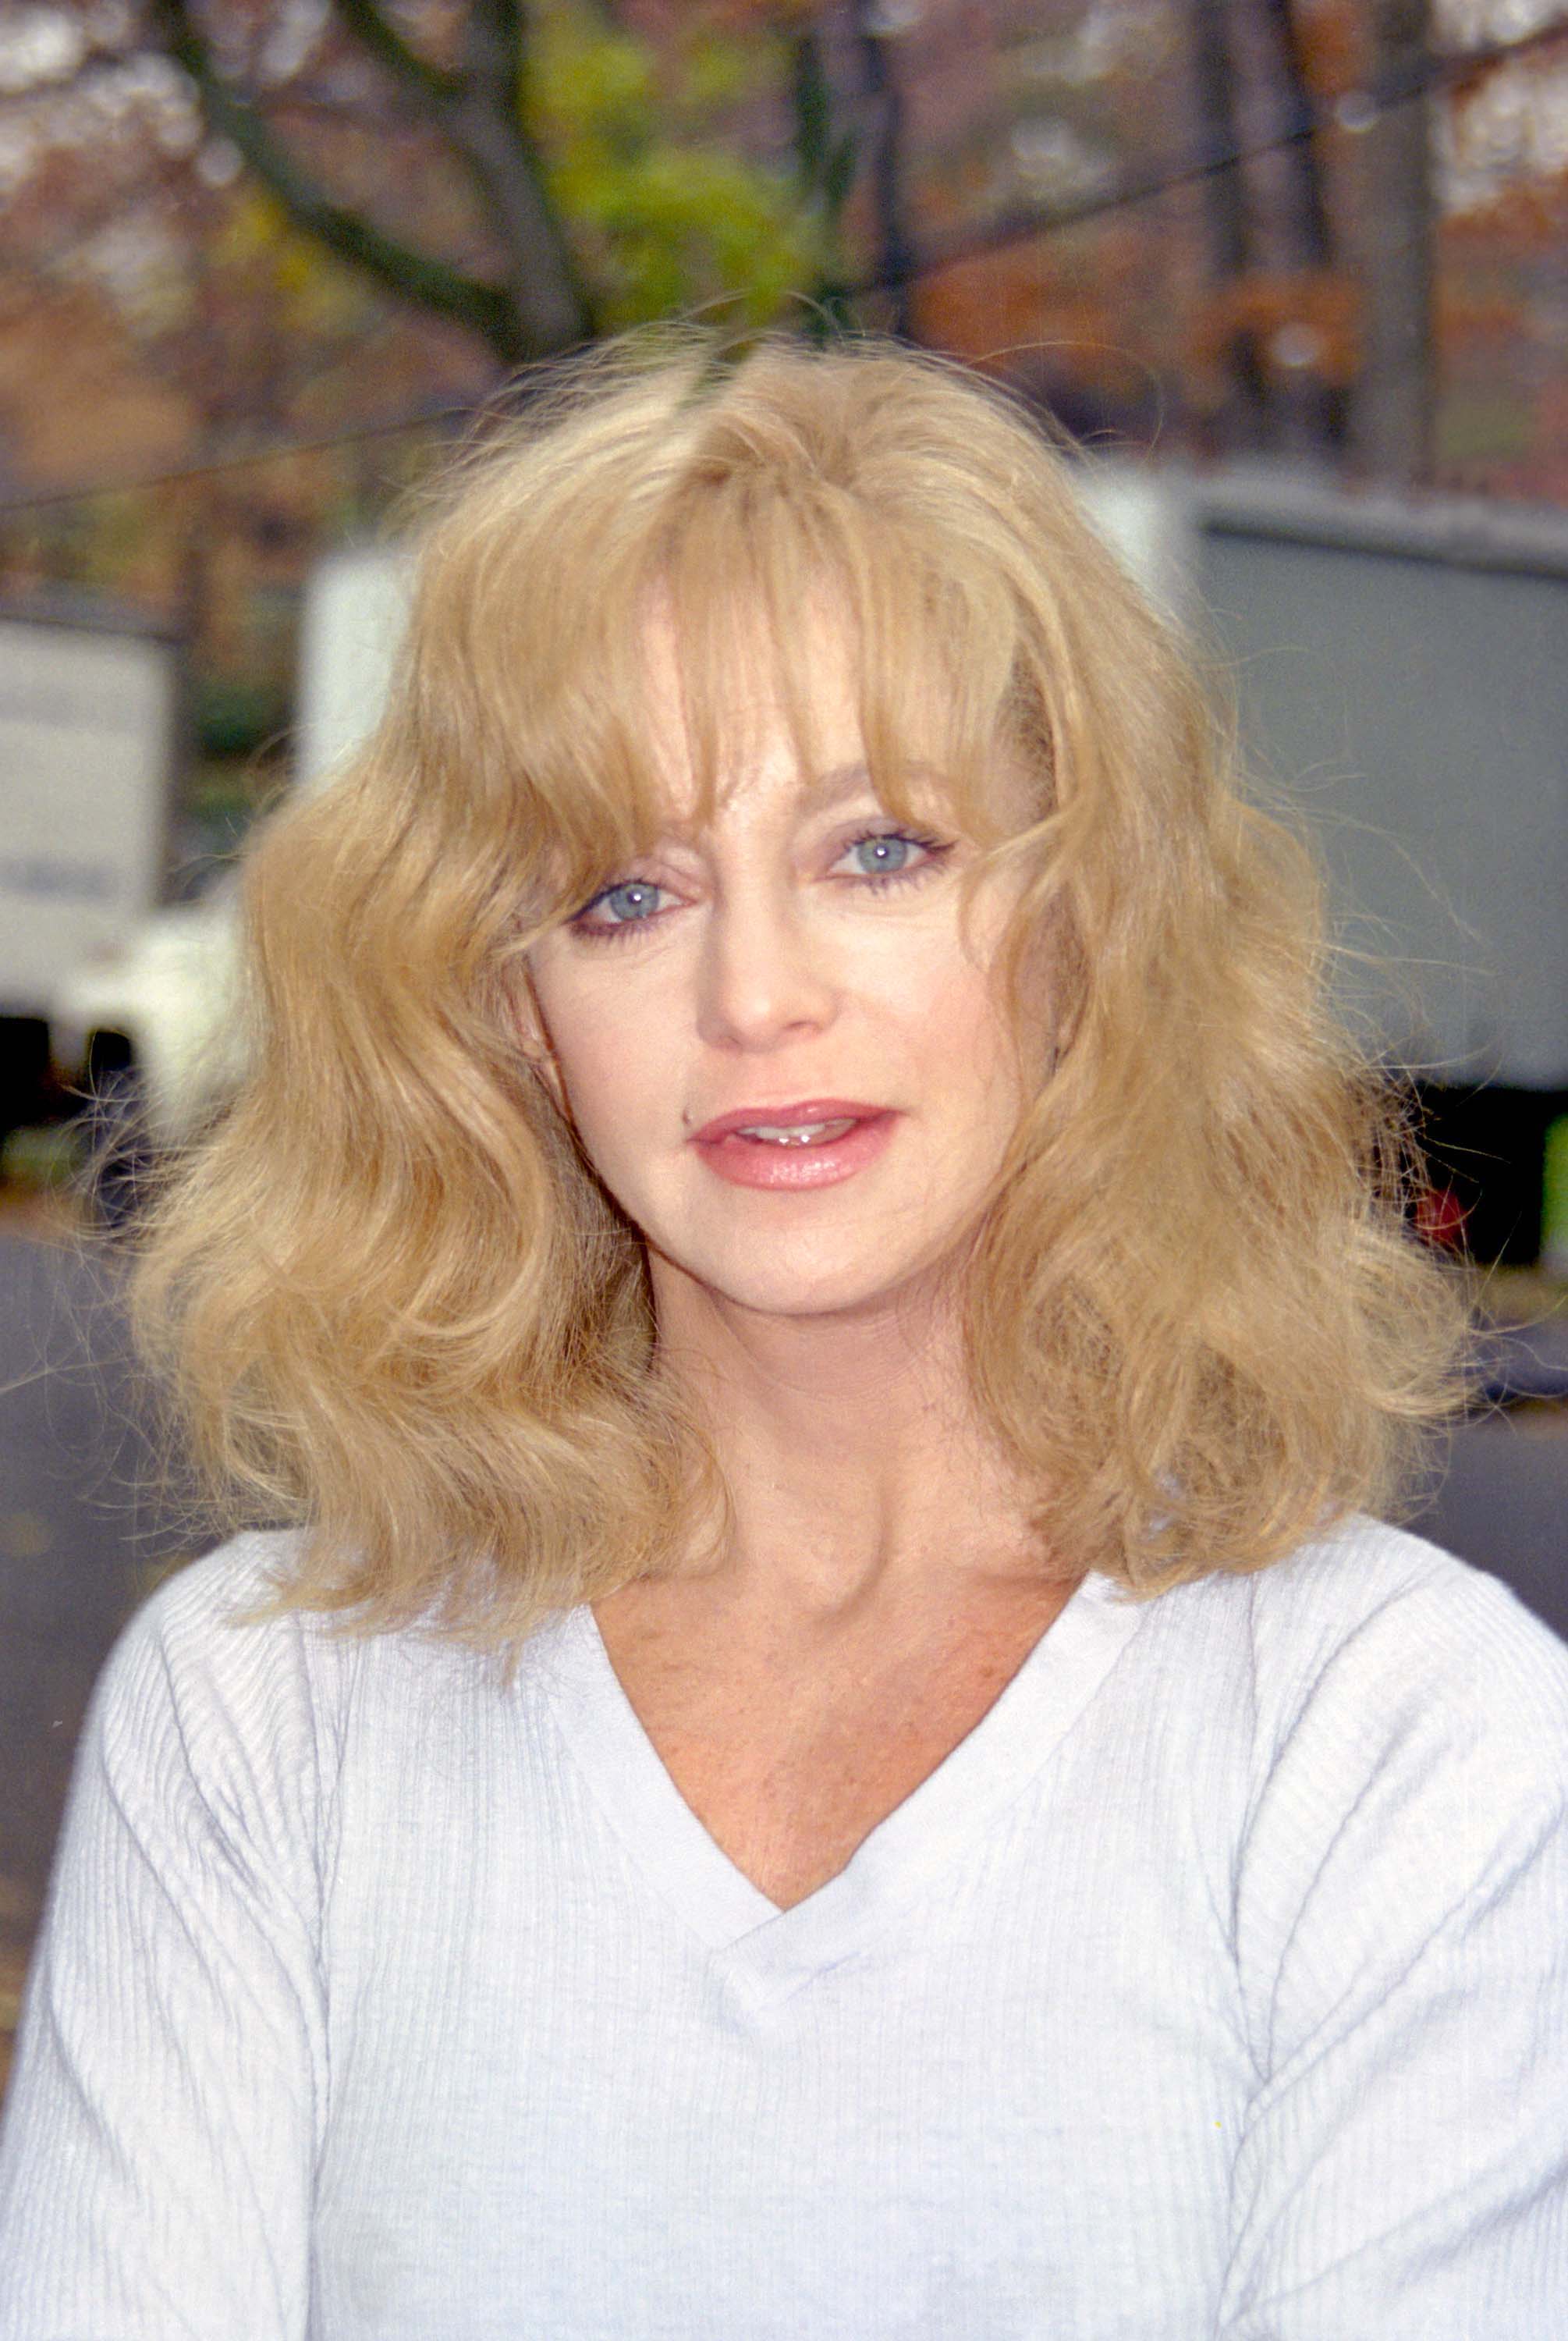 Goldie Hawn on the set of "Everyone Says I Love You" on April 14, 1995 in New York City. | Source: Getty Images